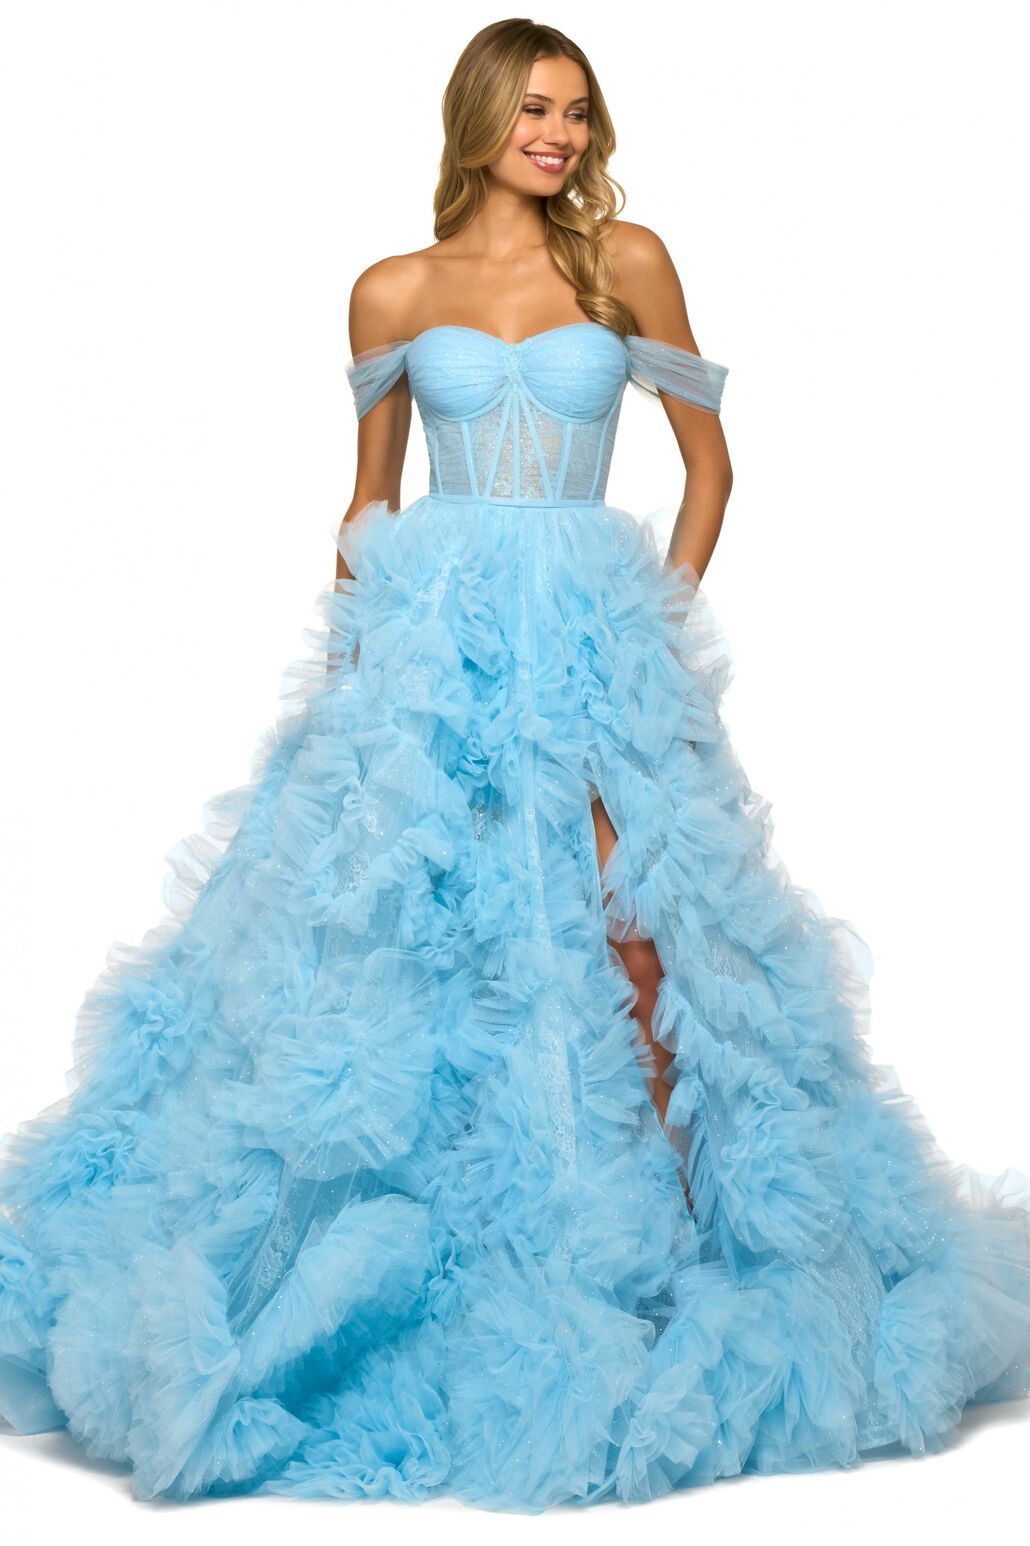 Shop the stunning Sherri Hill 55438 light blue shimmer tulle ballgown at Madeline's. Perfect for a glamorous evening, this long ballgown features an off-the-shoulder style, corset bodice, high slit, and ruffle skirt. Make a statement at your next special occasion in this elegant dress.